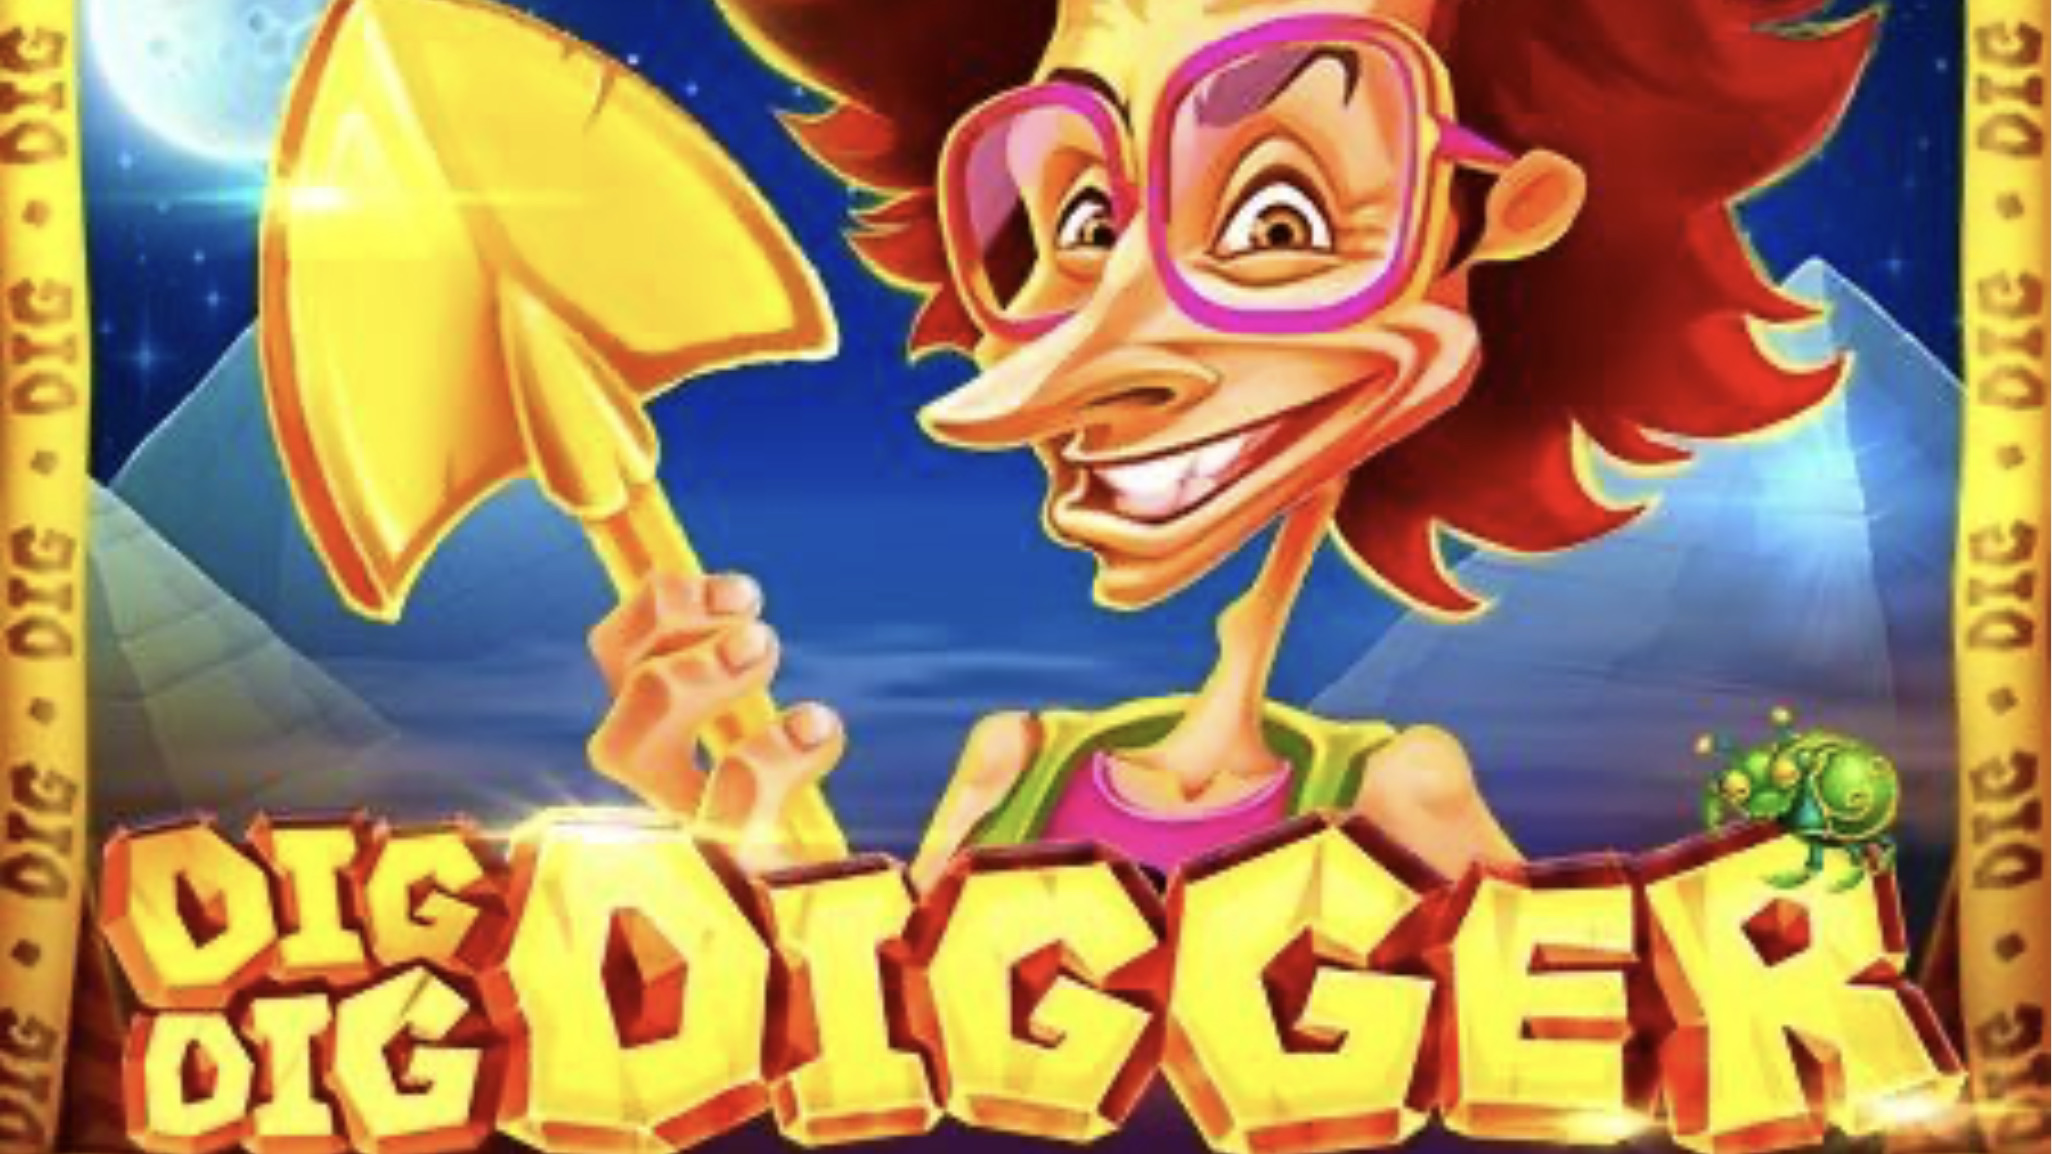 Feature image of BGaming's latest slot title Dig Dig Digger based in the Egyptian desert